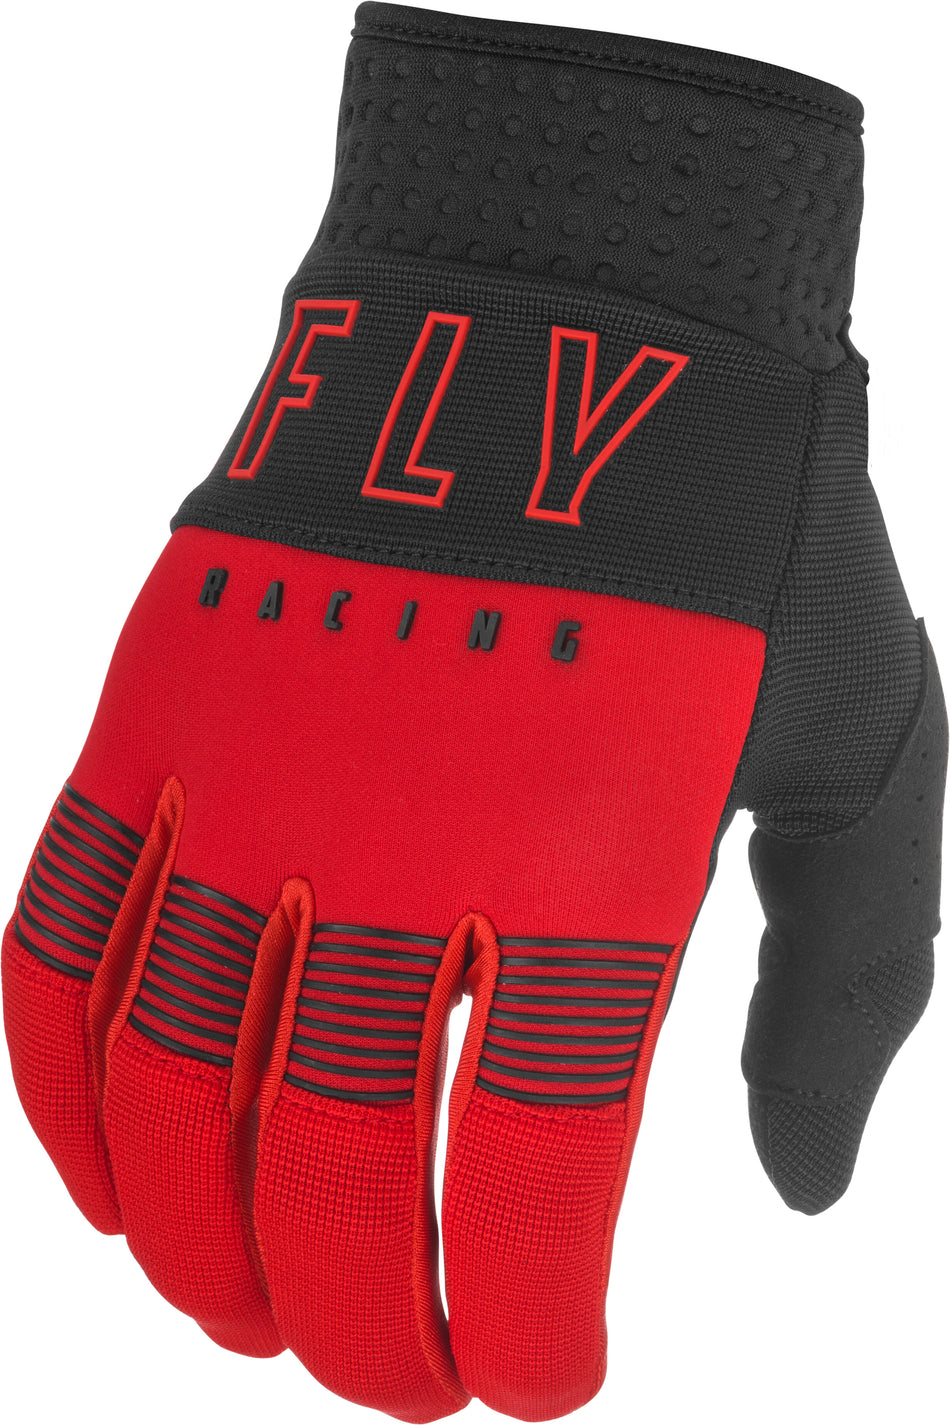 FLY RACING F-16 Gloves Red/Black Sz 08 374-91208